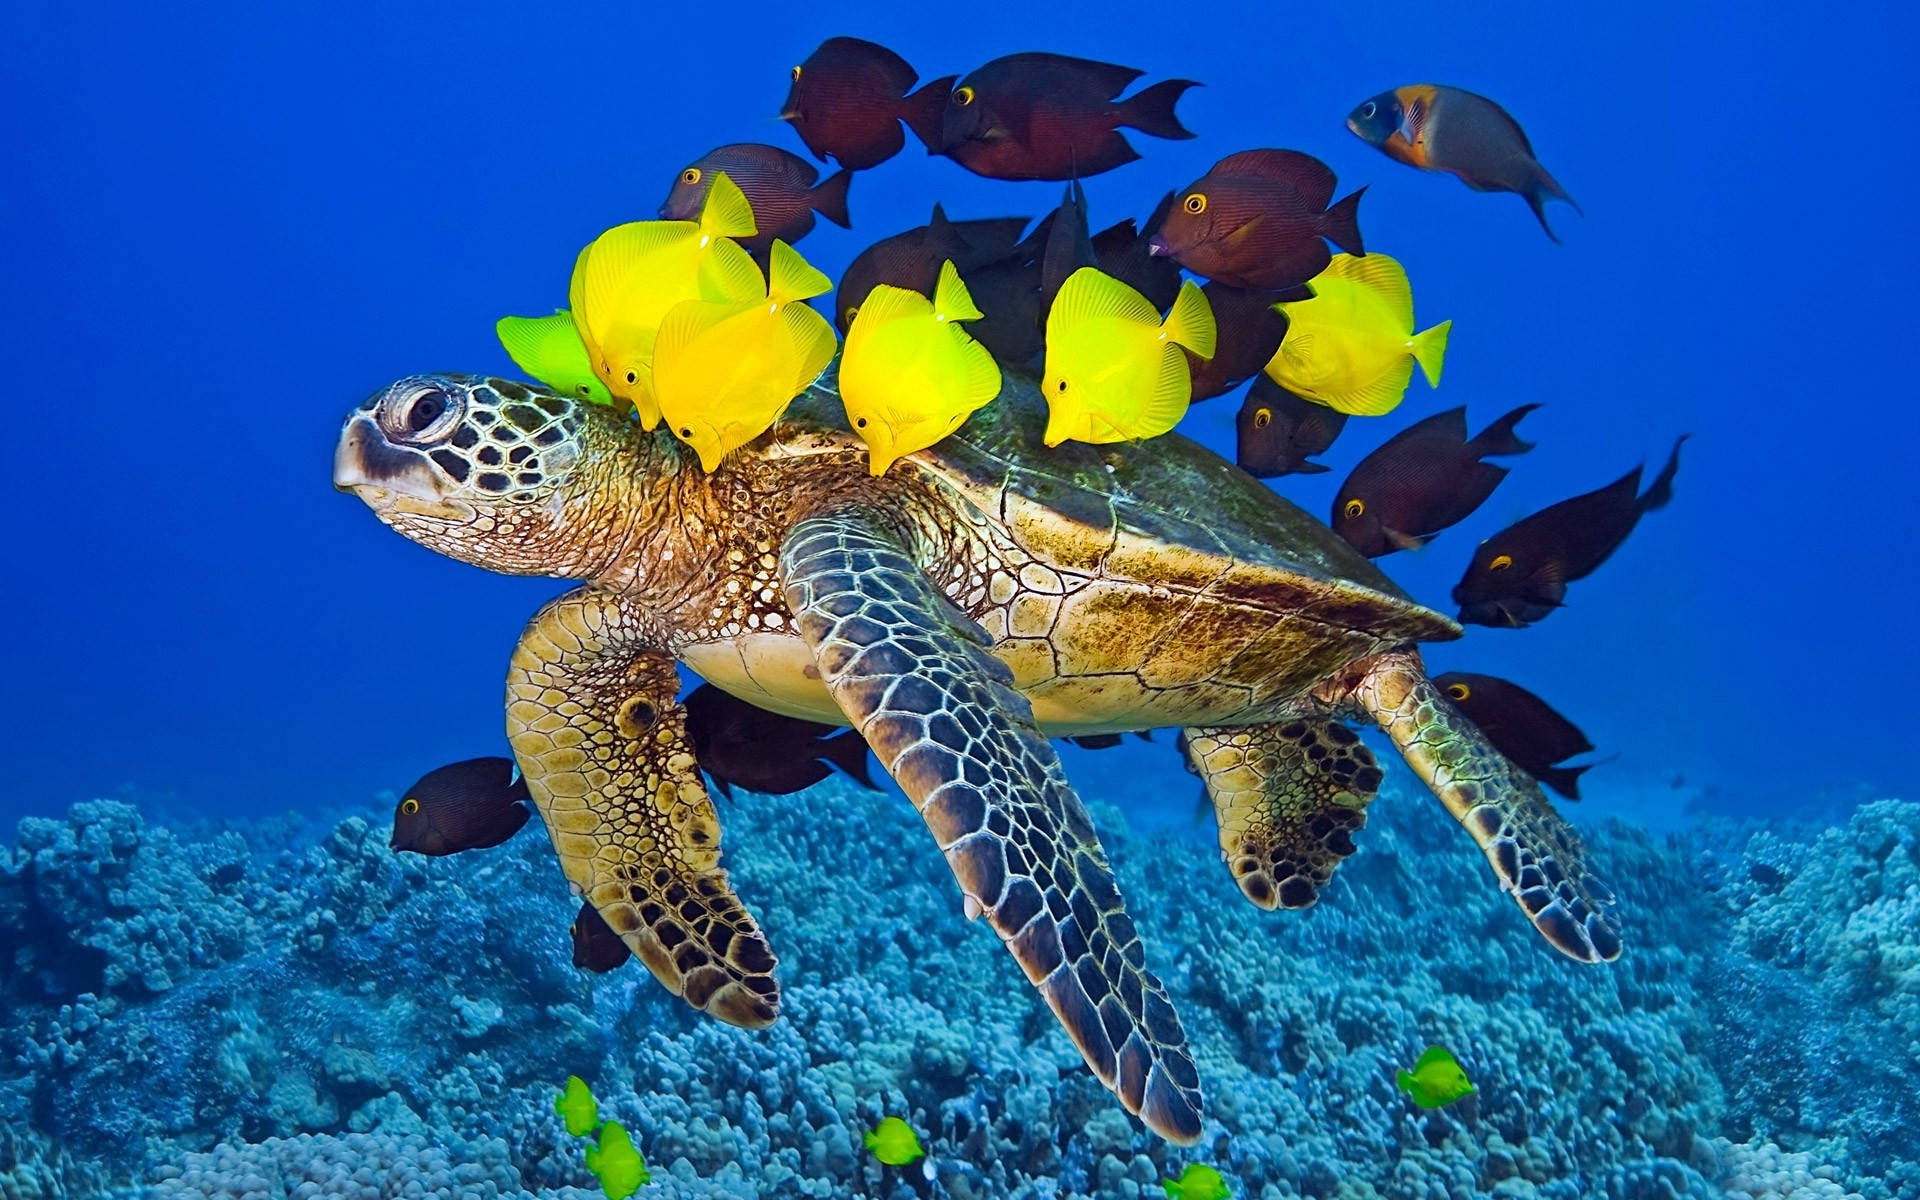 Big Cute Turtle With Fishes